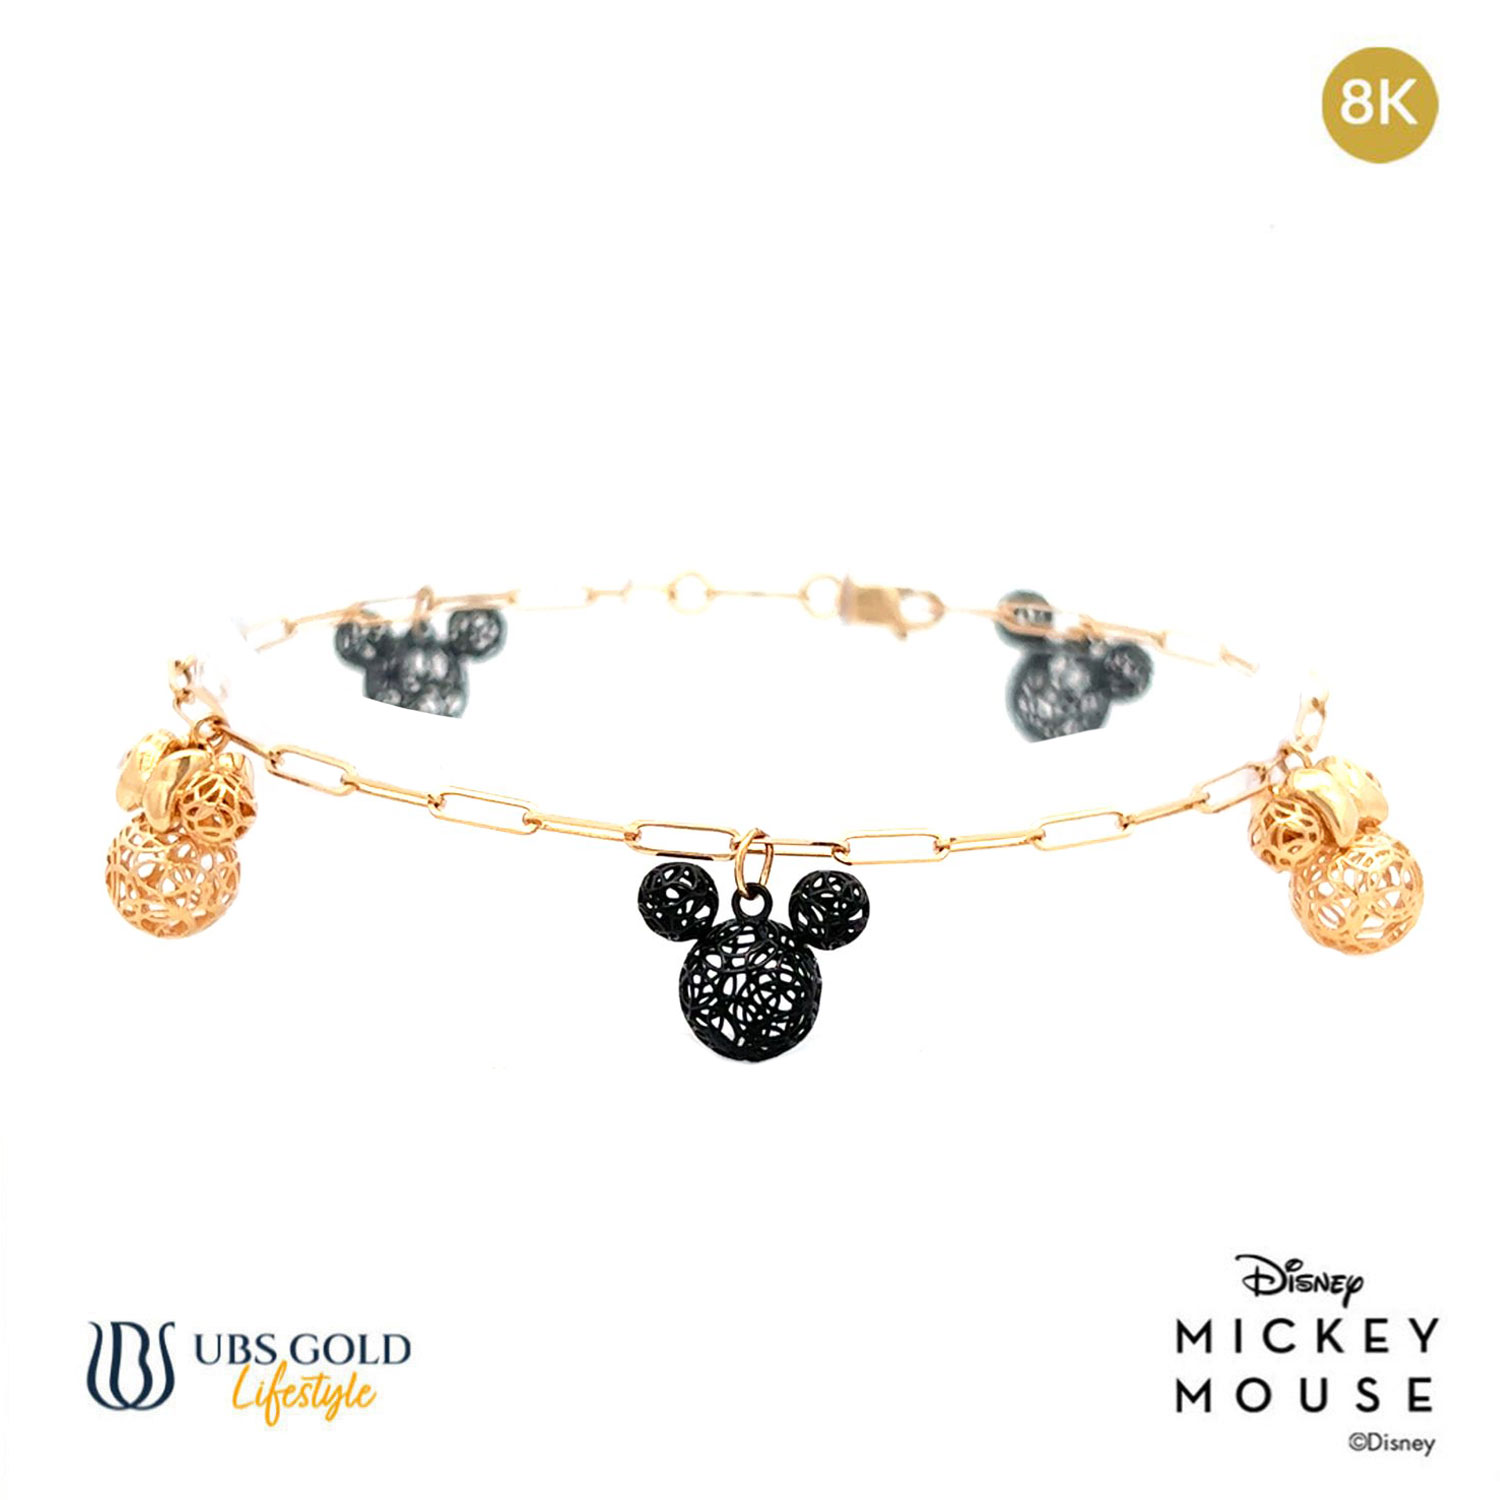 UBS Gold Gelang Emas Disney Mickey Minnie Mouse - Kgy0109K - 8K